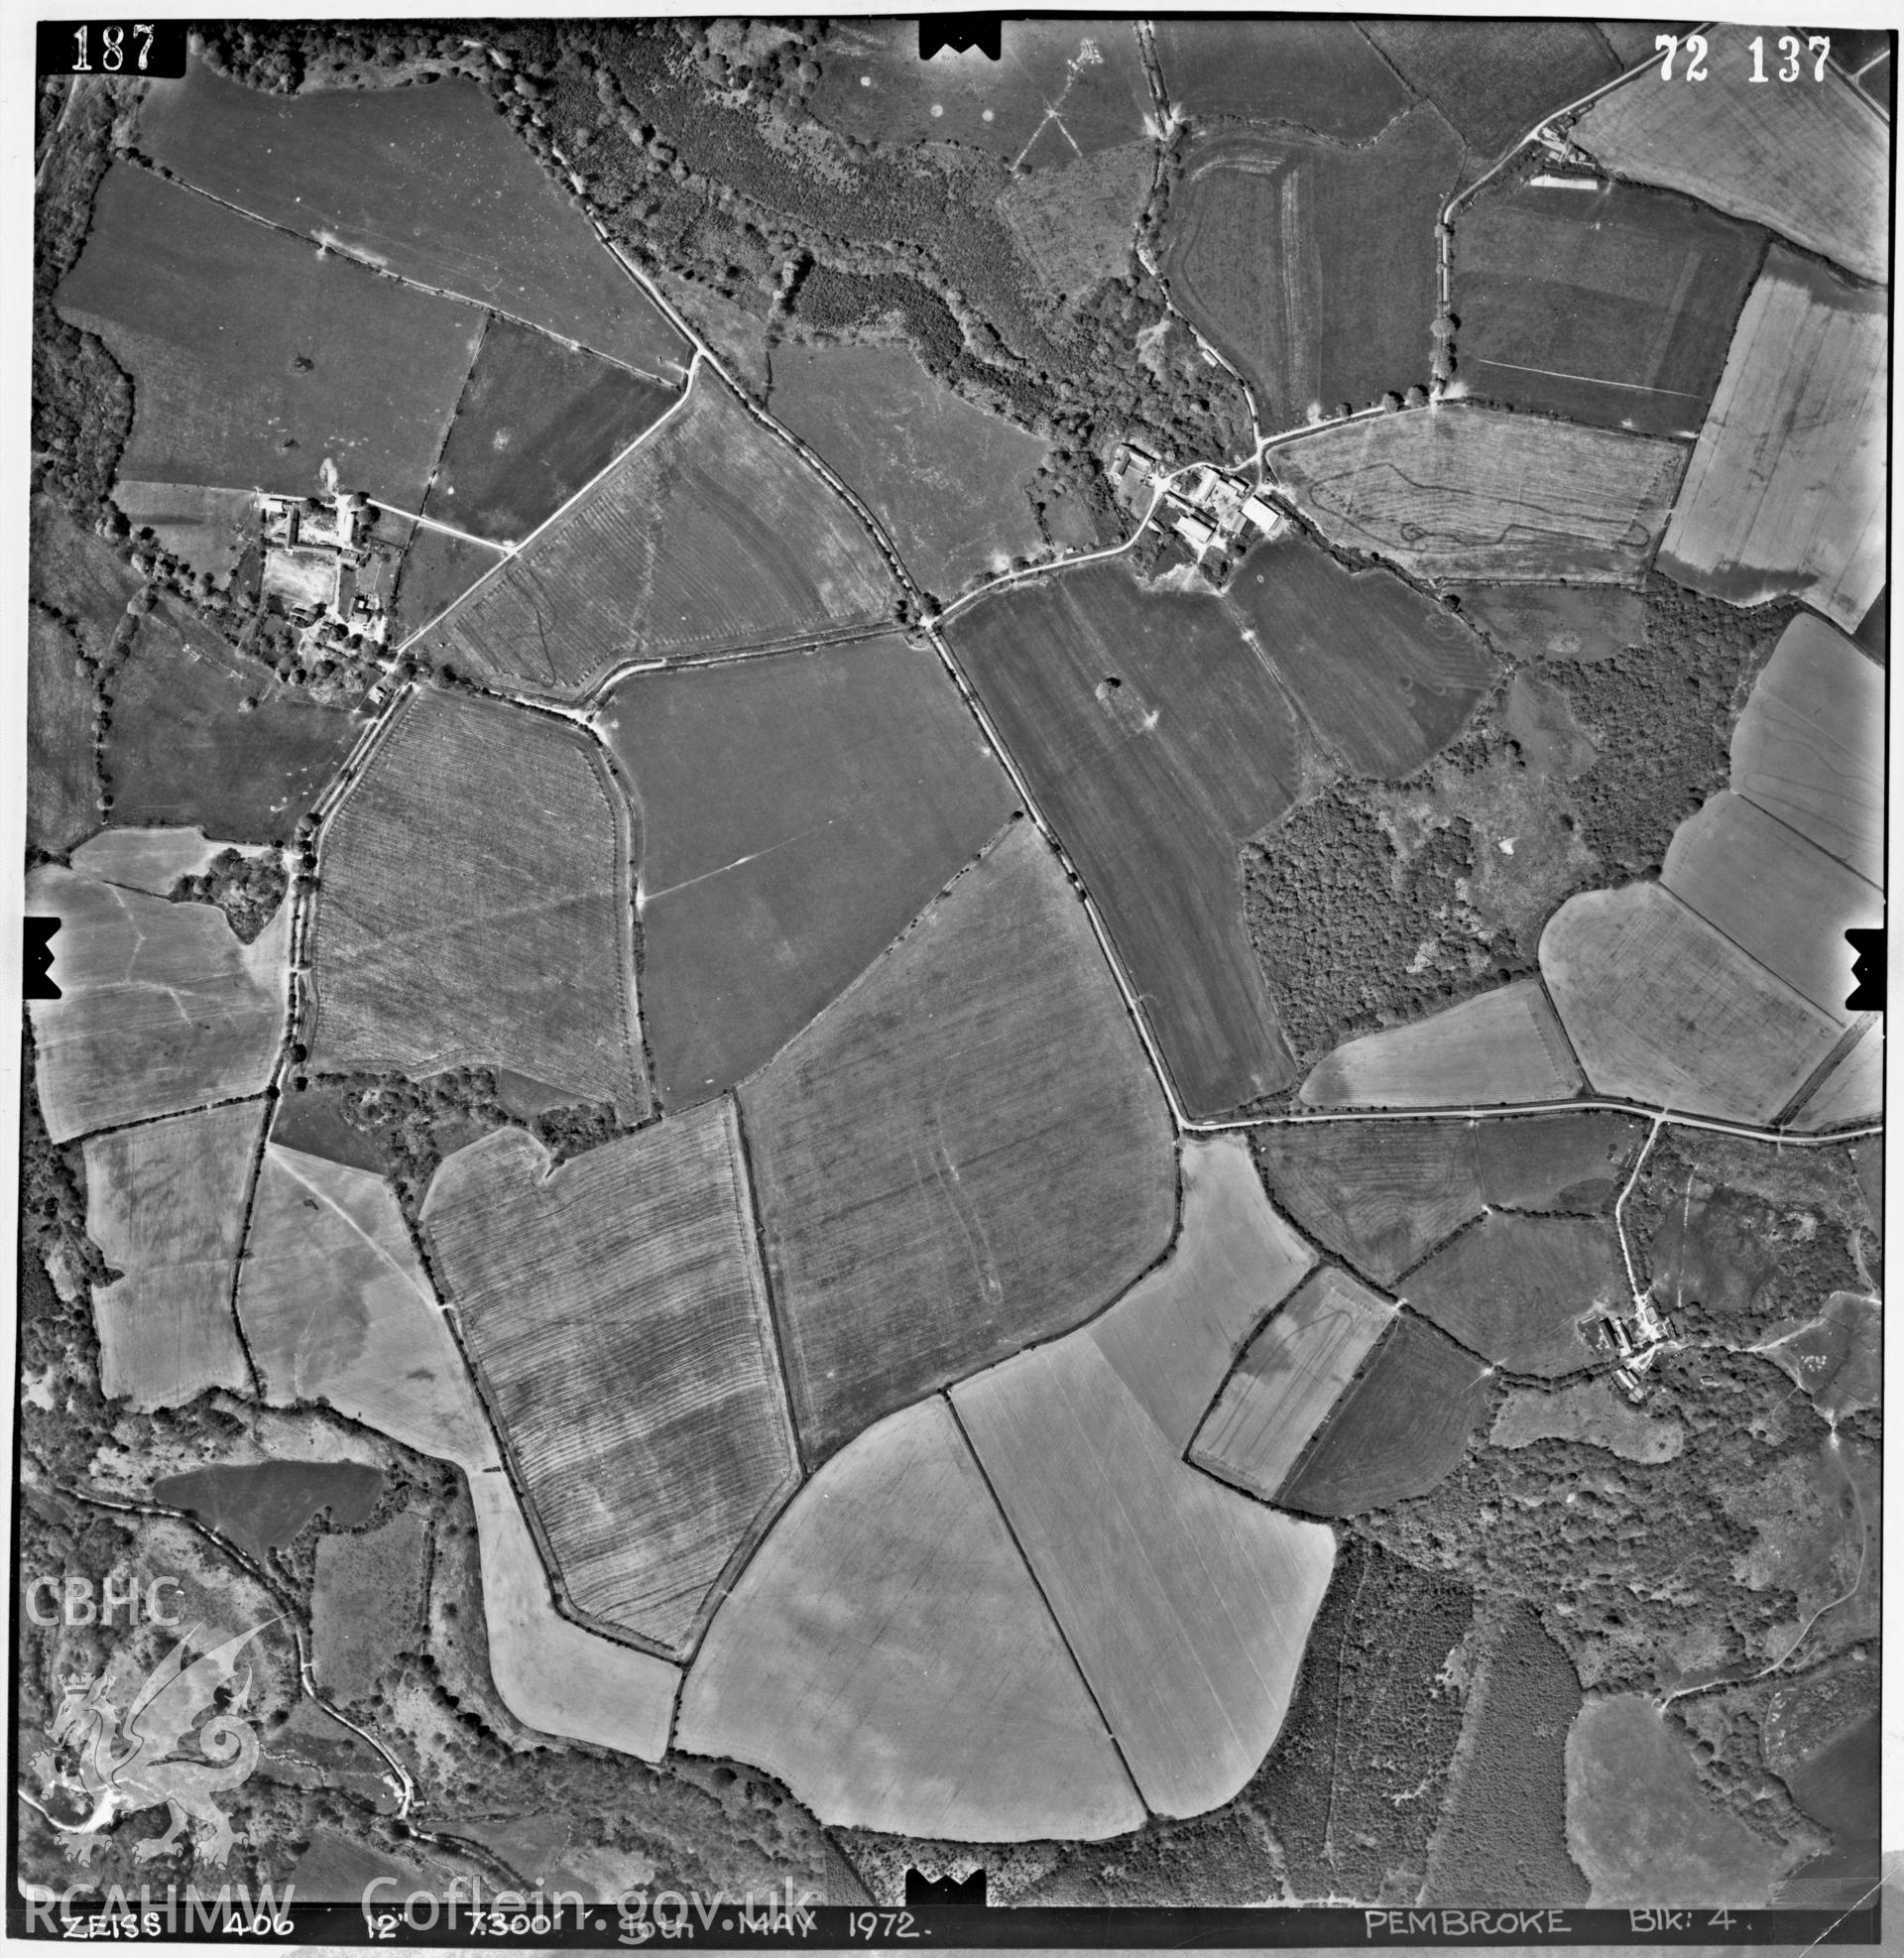 Digitized copy of an aerial photograph showing area to the north-east of Felindre Farchog, Pembrokeshire, taken by Ordnance Survey, 1972.